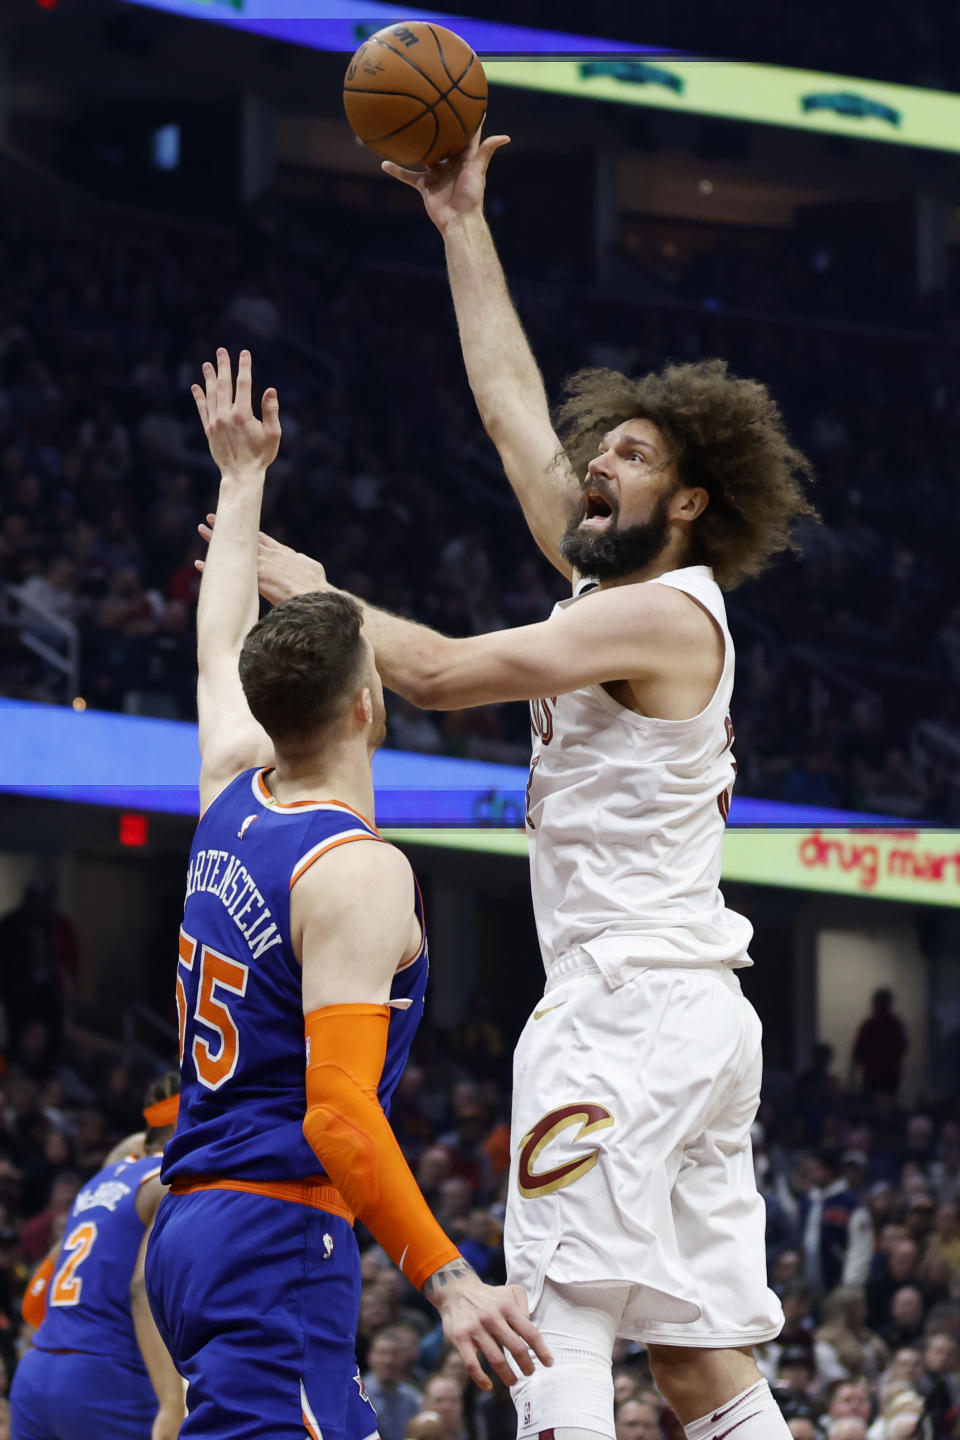 Cleveland Cavaliers center Robin Lopez shoots against New York Knicks center Isaiah Hartenstein (55) during the first half of an NBA basketball game Friday, March 31, 2023, in Cleveland. (AP Photo/Ron Schwane)